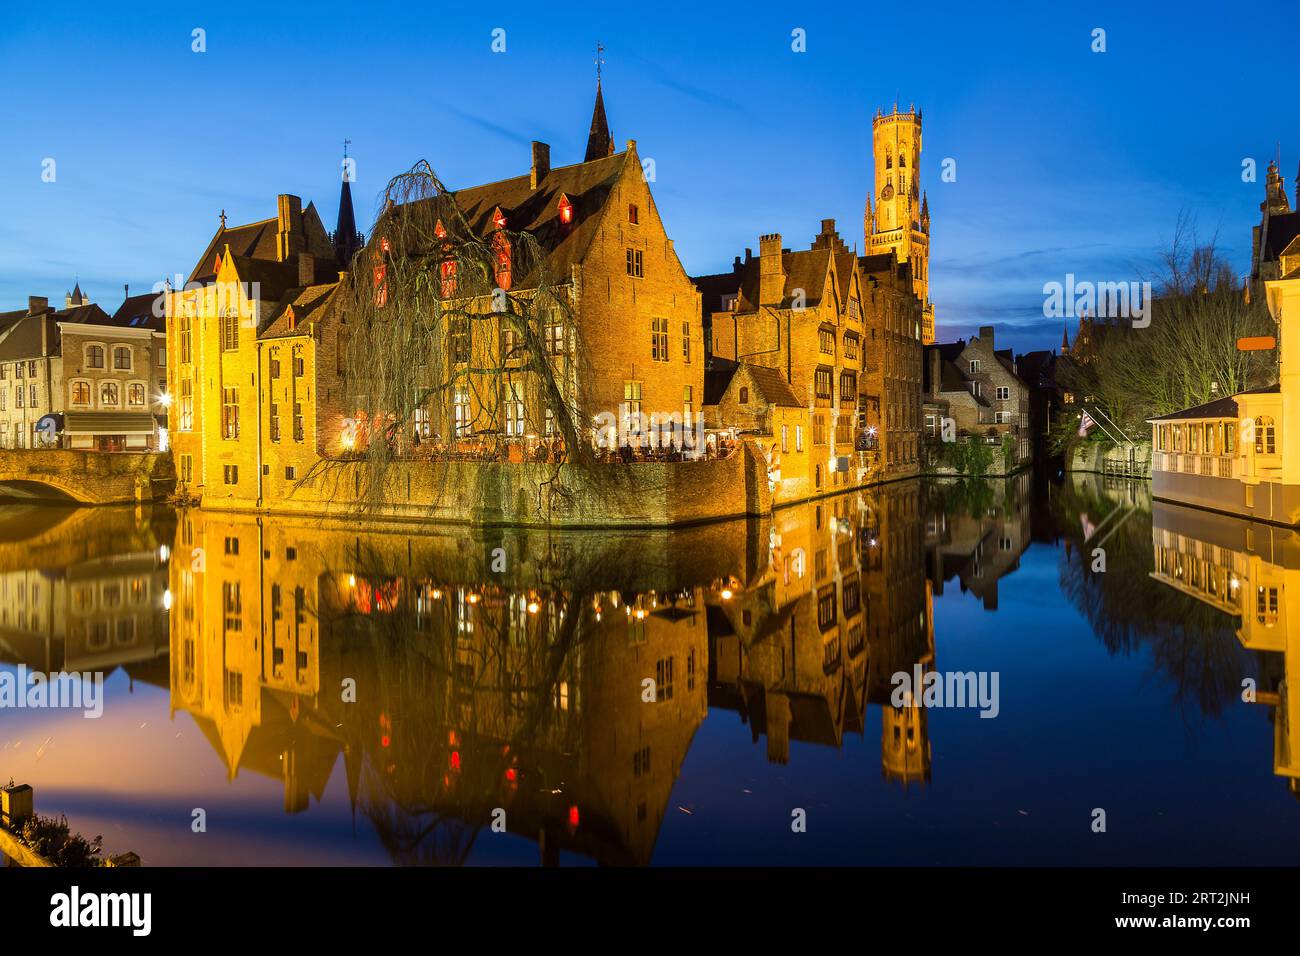 A view of Bruges from Rozenhoedkaai street at dusk. The Belfry of Bruges can be seen in the distance. Other buildings and reflections can be seen in t Stock Photo